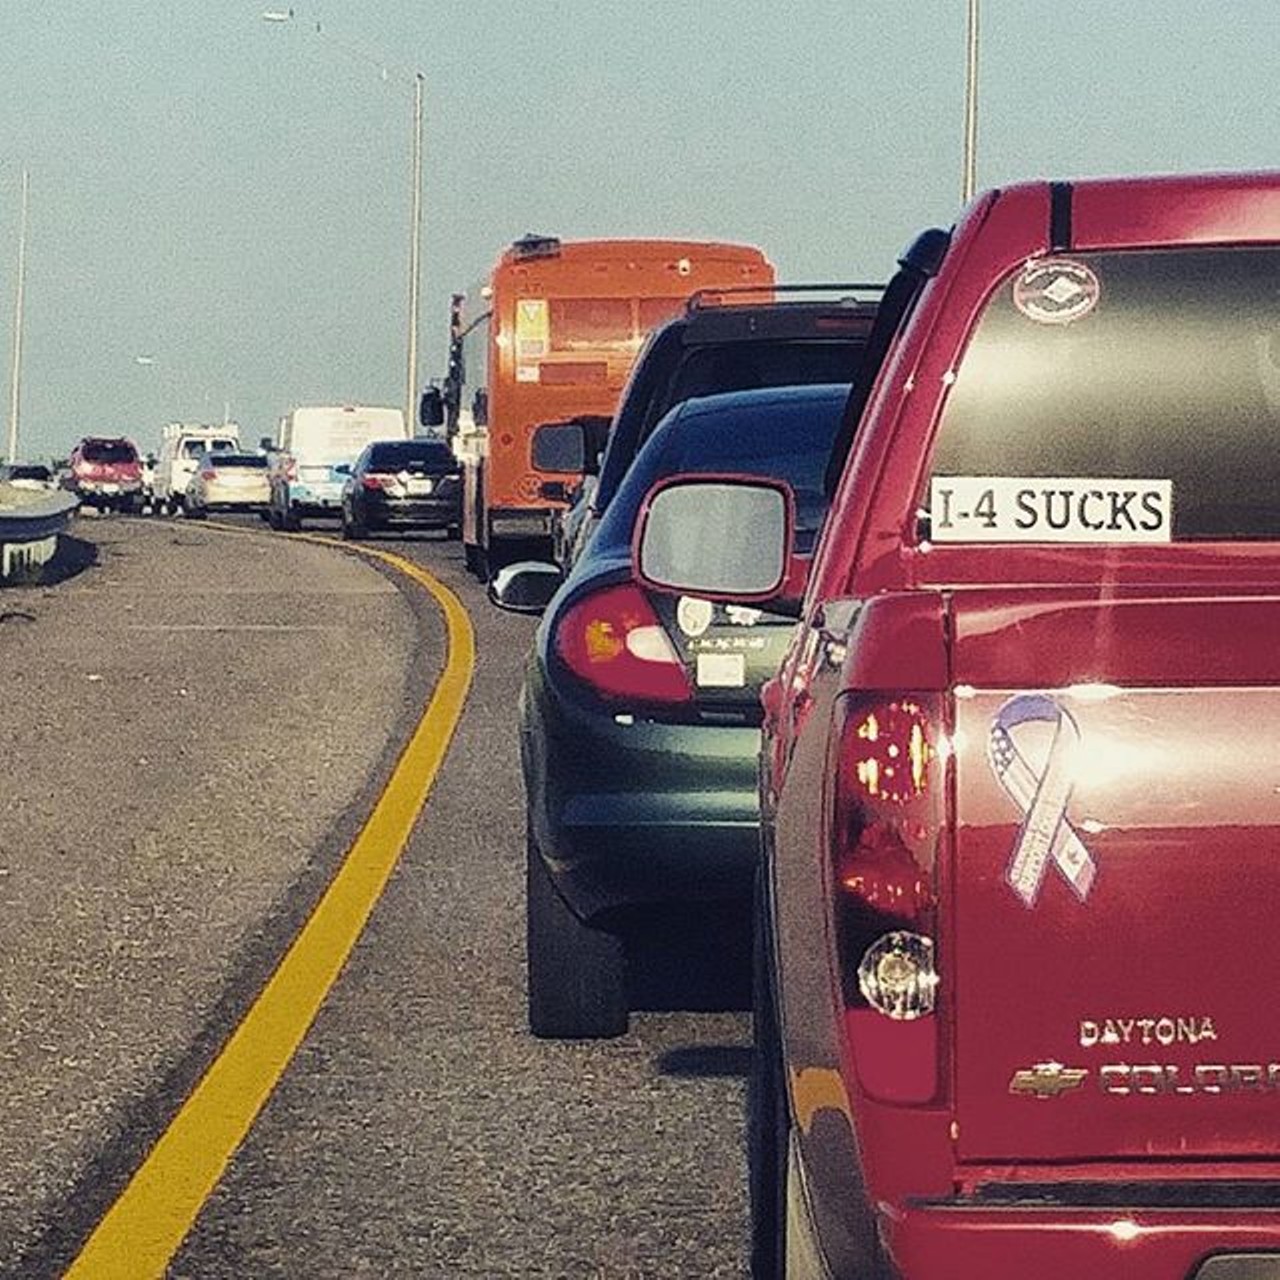 Taking I-4 anywhere, anytime
Saying &#147;I got stuck on the 4&#148; isn&#146;t a viable excuse for being late anymore. 
Photo via jeannie_marie_o on Instagram